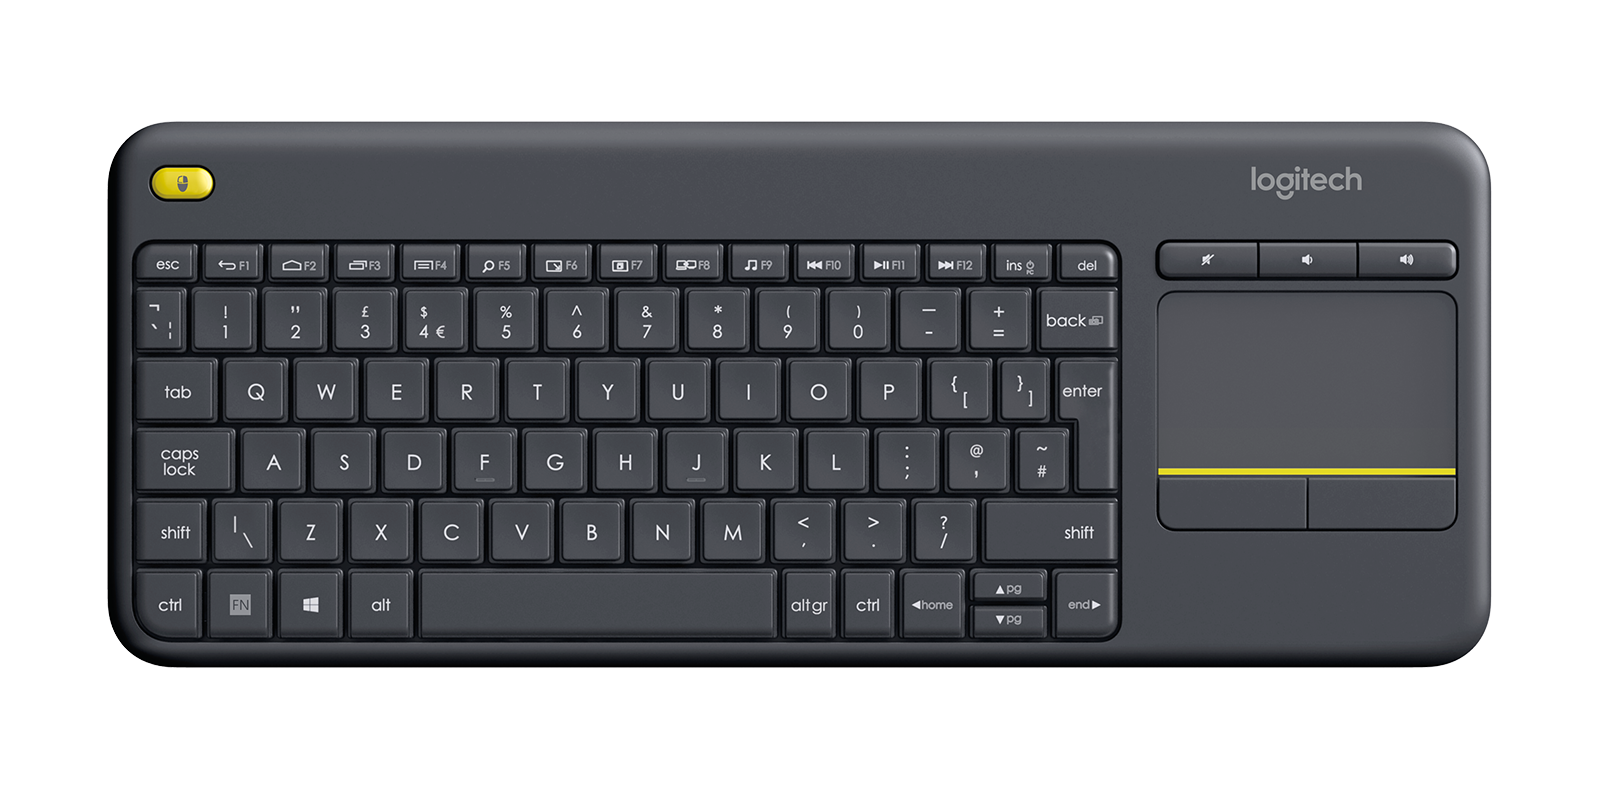 Klan Tolk Match Logitech K400 Plus Touchpad Keyboard for TV connected PC